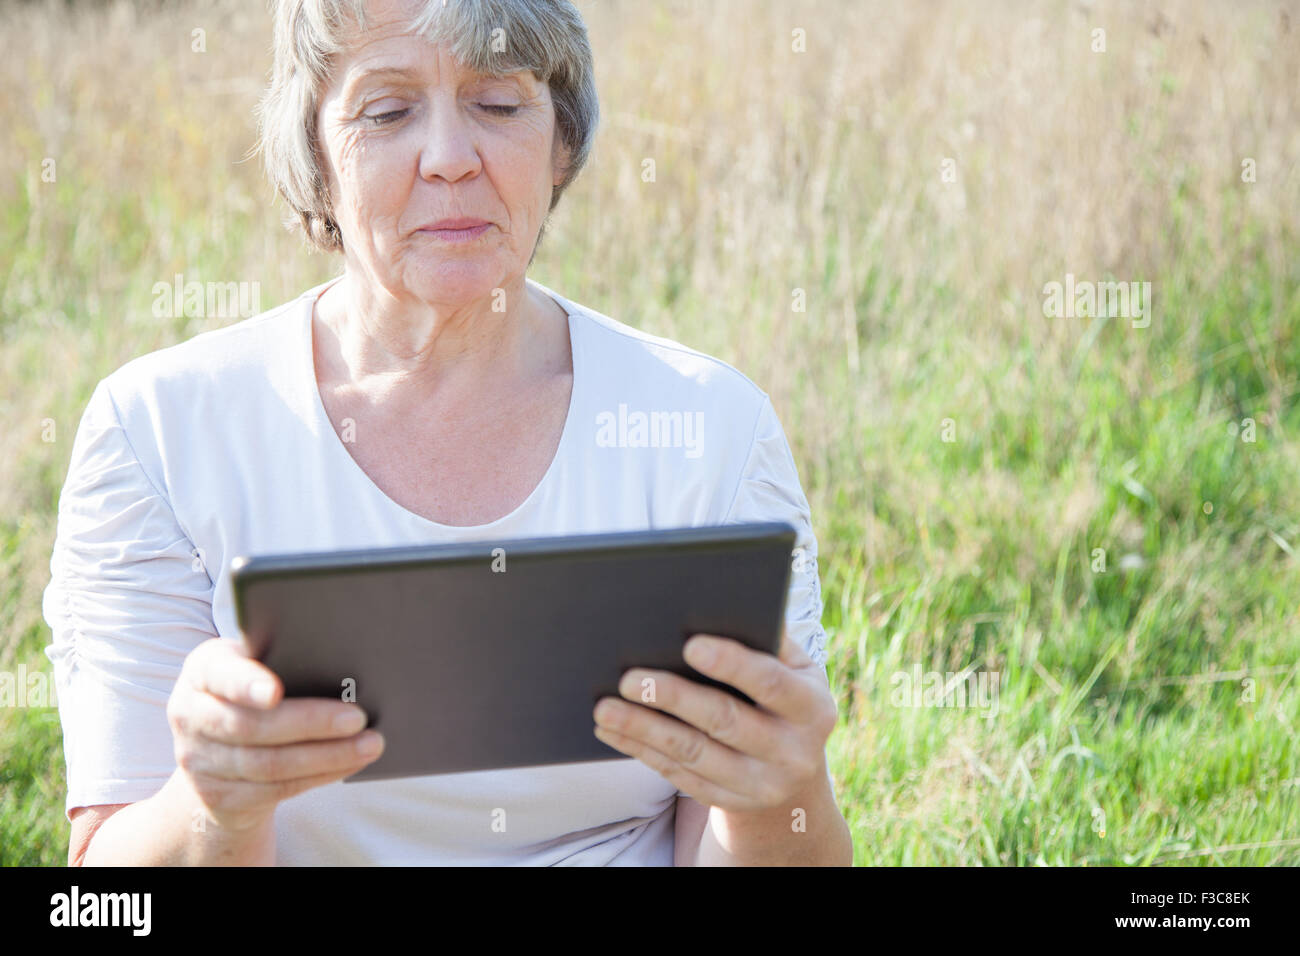 Old age woman using tablet device Stock Photo